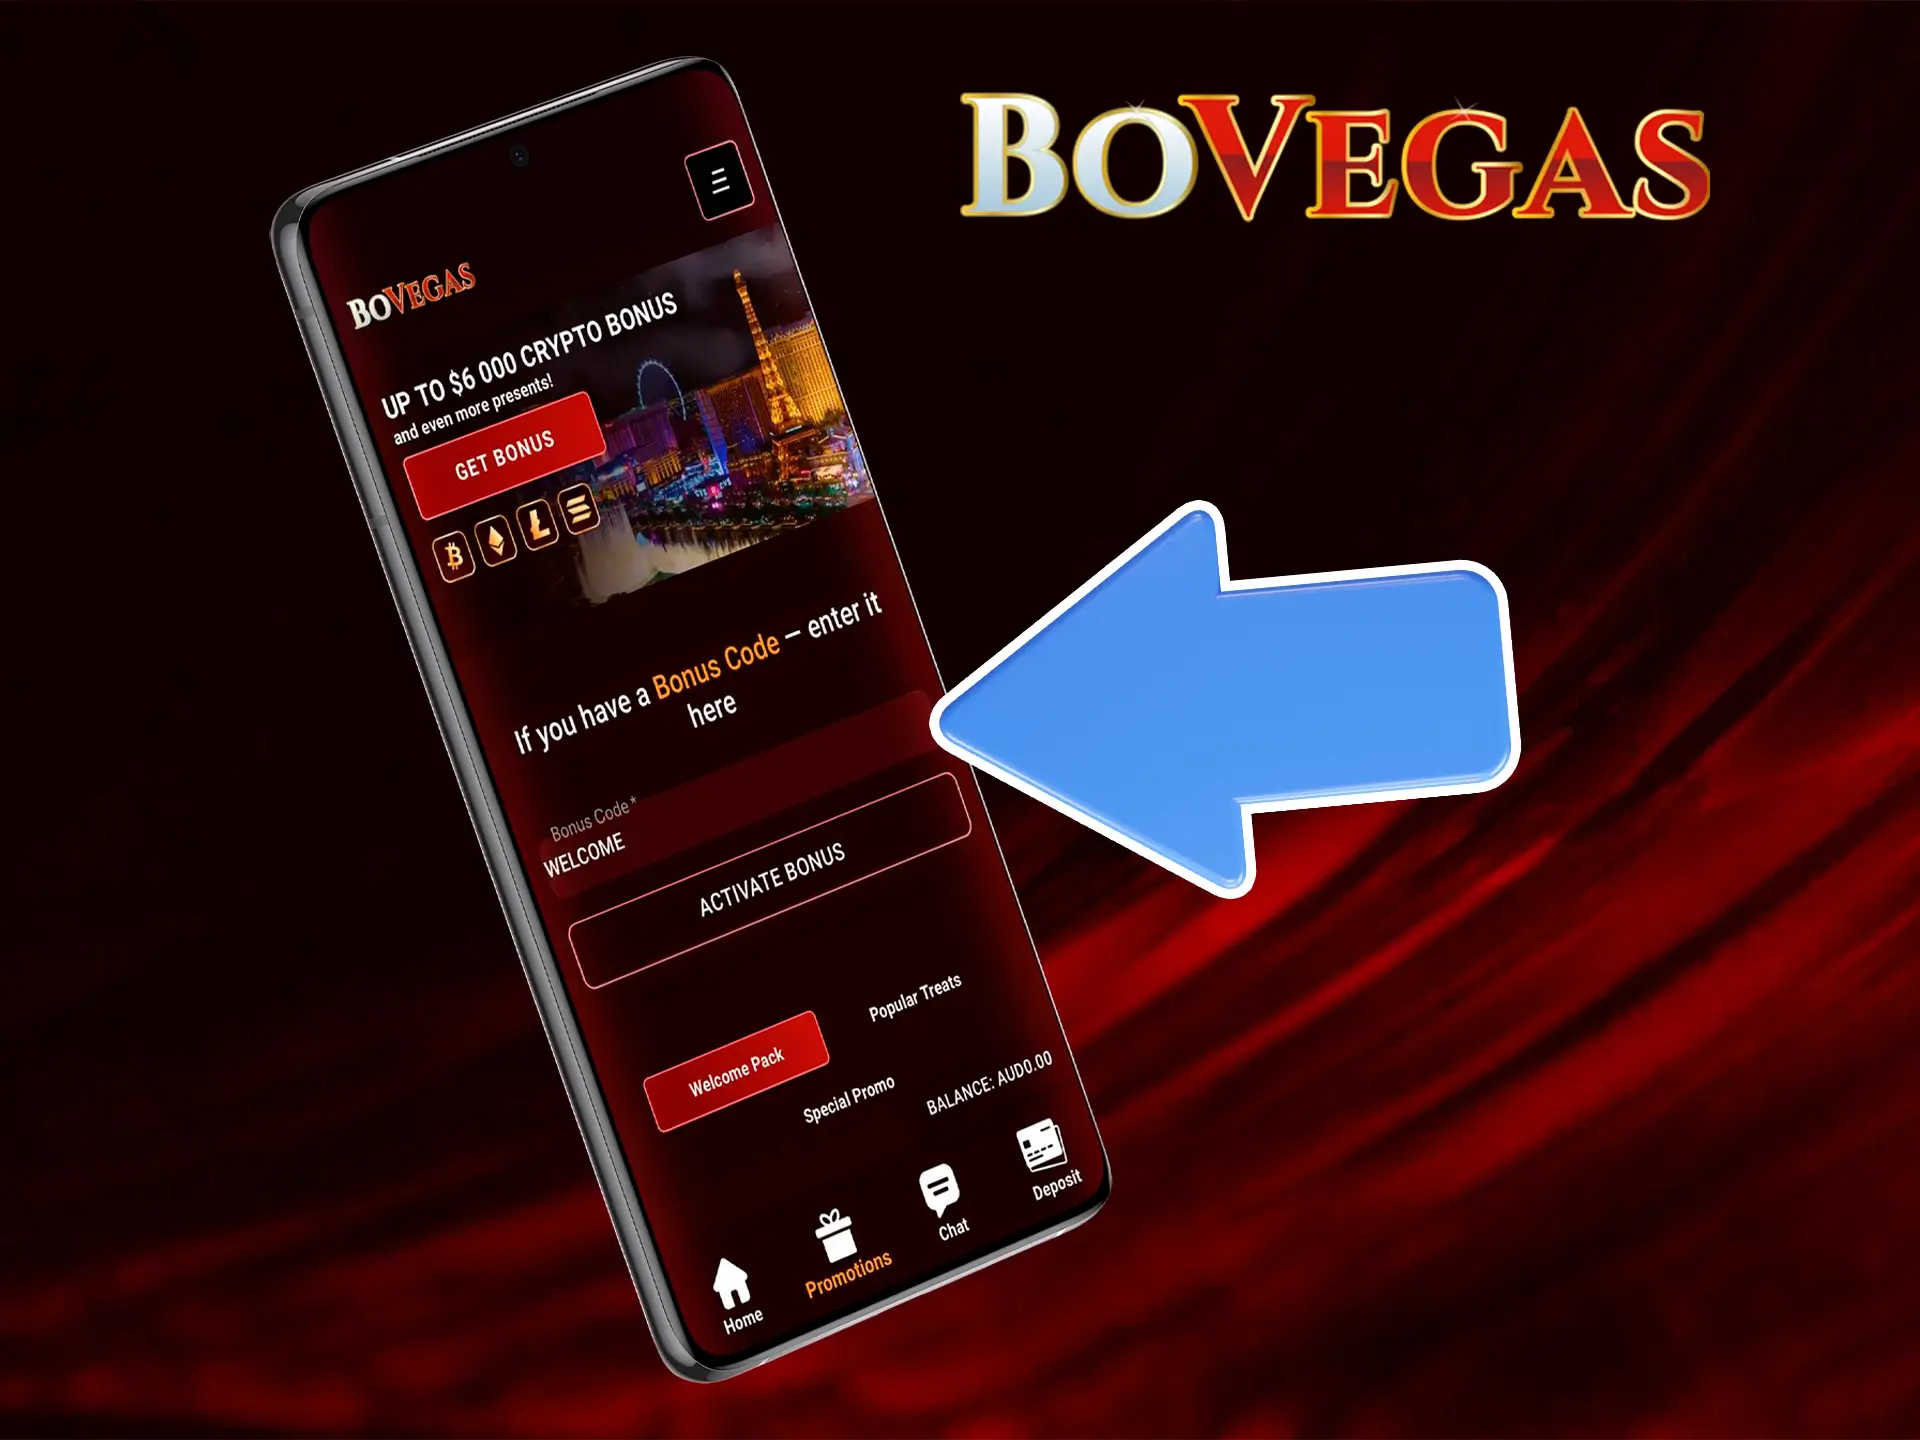 The mobile app from BoVegas gives you the opportunity to use promo codes from anywhere in the world.